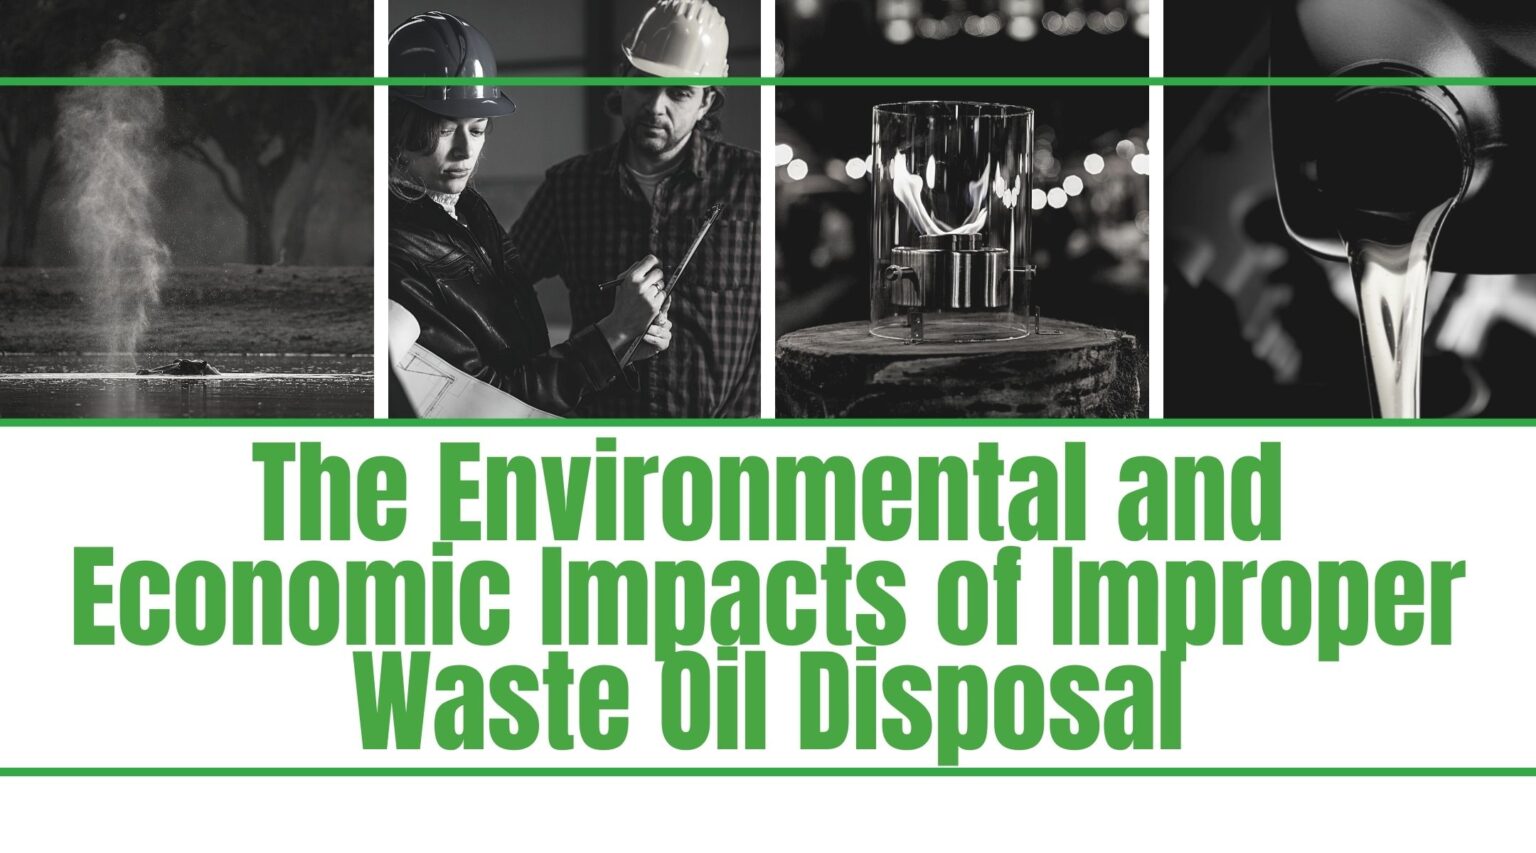 The Environmental and Economic Impacts of Improper Waste Oil Disposal